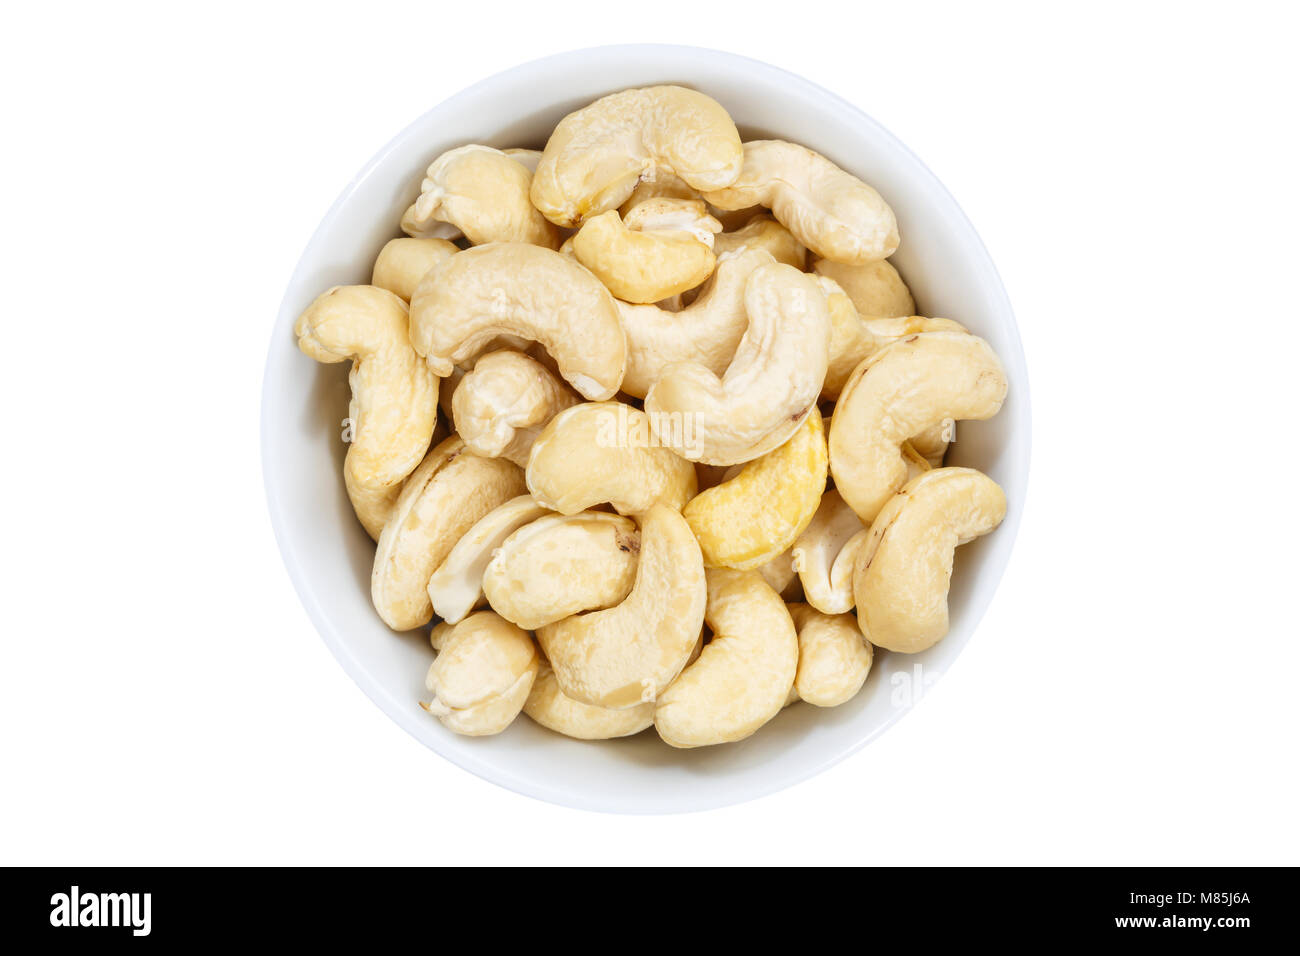 Cashew nuts cashews from above bowl isolated on a white background Stock Photo